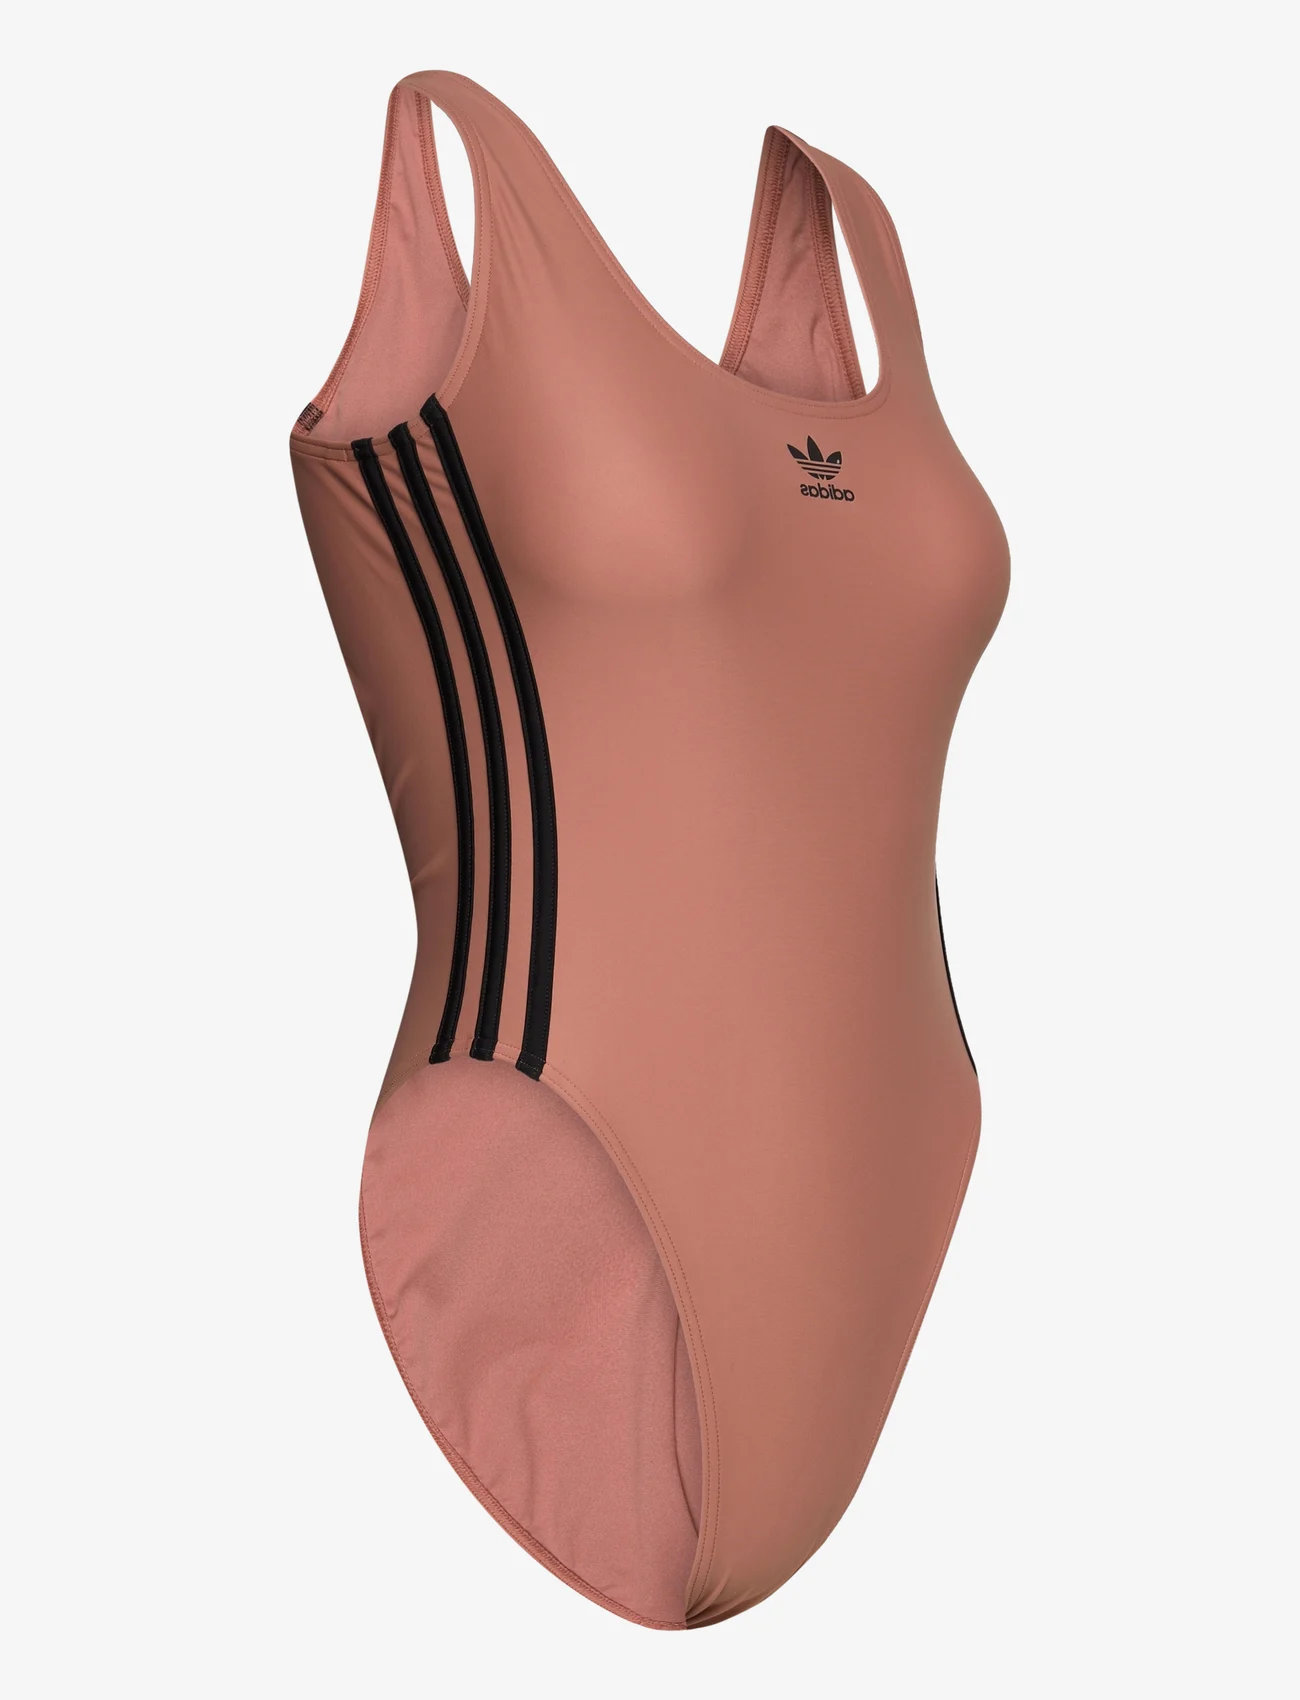 adidas Performance - Adicolor 3-Stripes Swimsuit - badedragter - clastr/white - 1